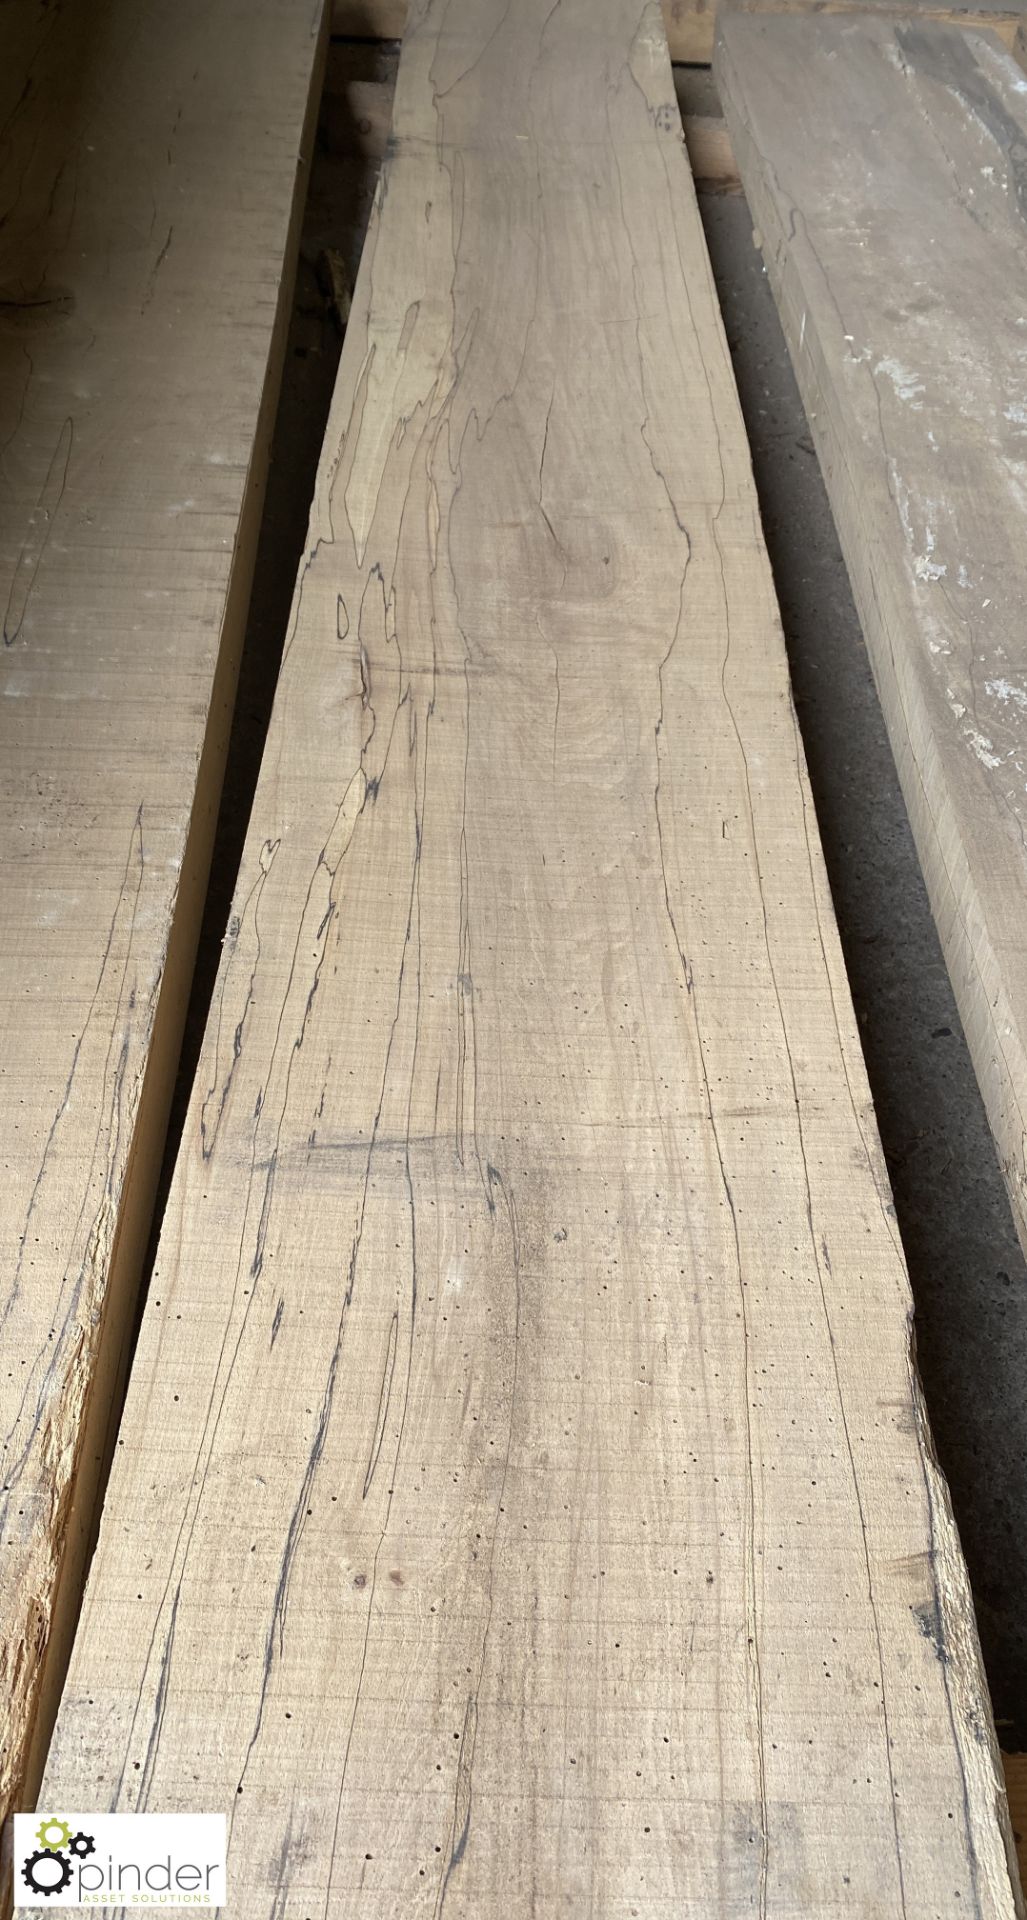 Air dried Spalted Beech Board, 2450mm x 320mm x 100mm - Image 3 of 5